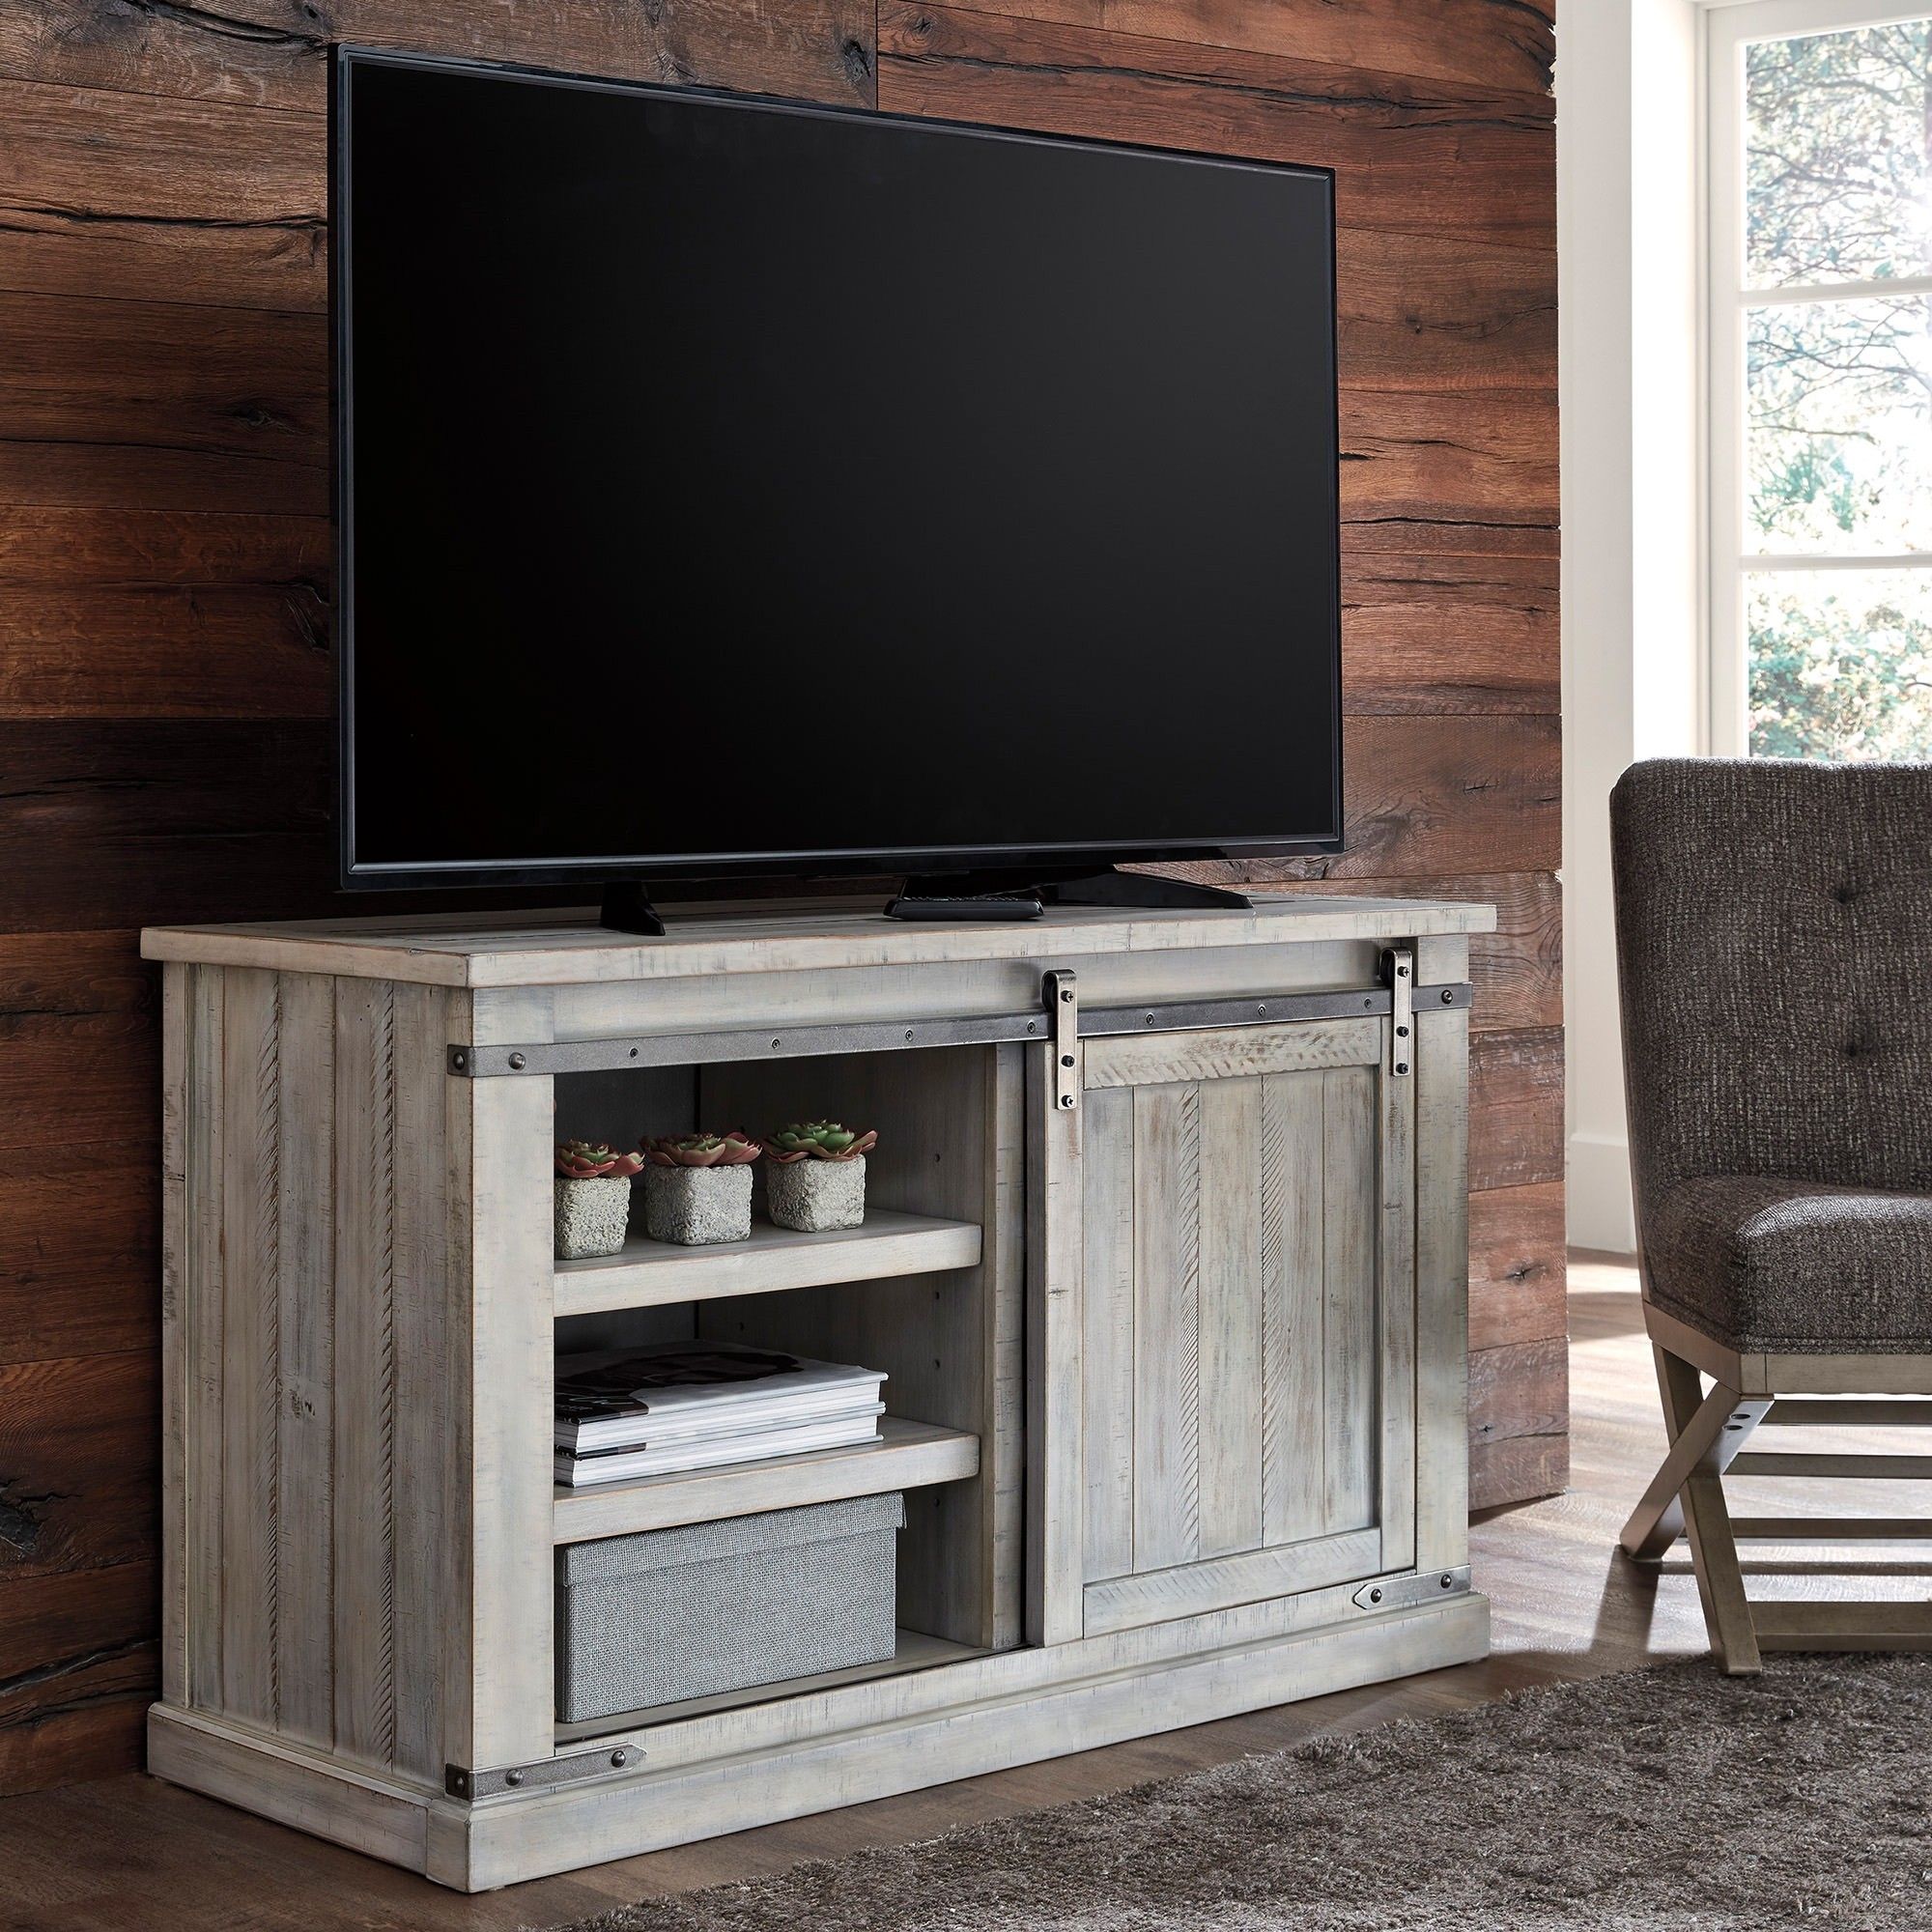 Carynhurst Medium 50 Inch Tv Stand – Bernie & Phyl's Inside 50 Inch Fireplace Tv Stands (View 12 of 15)